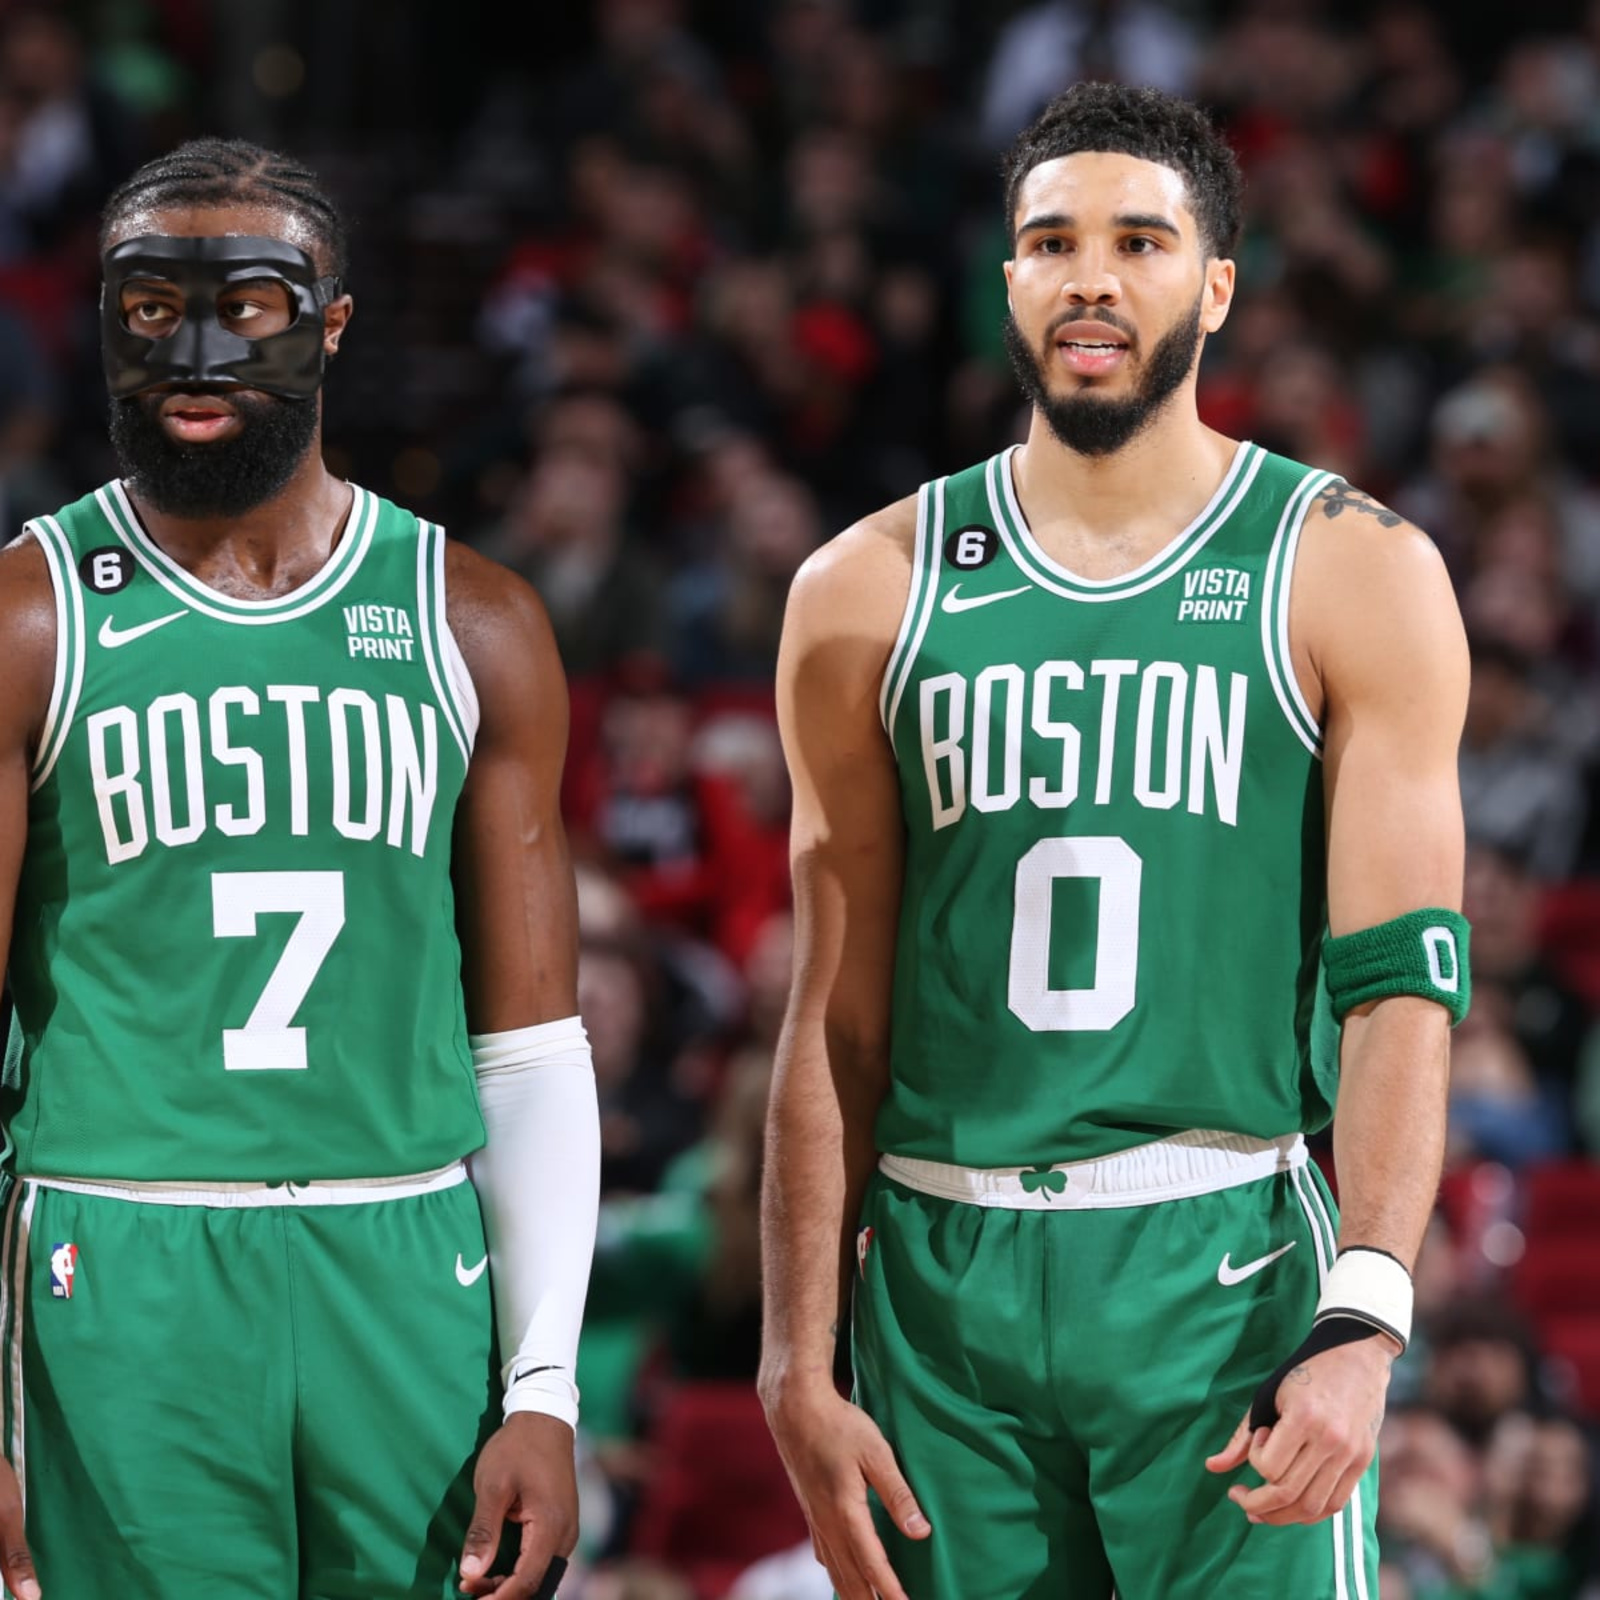 Jaylen Brown calls out Celtics fans ahead of Game 7 in Boston